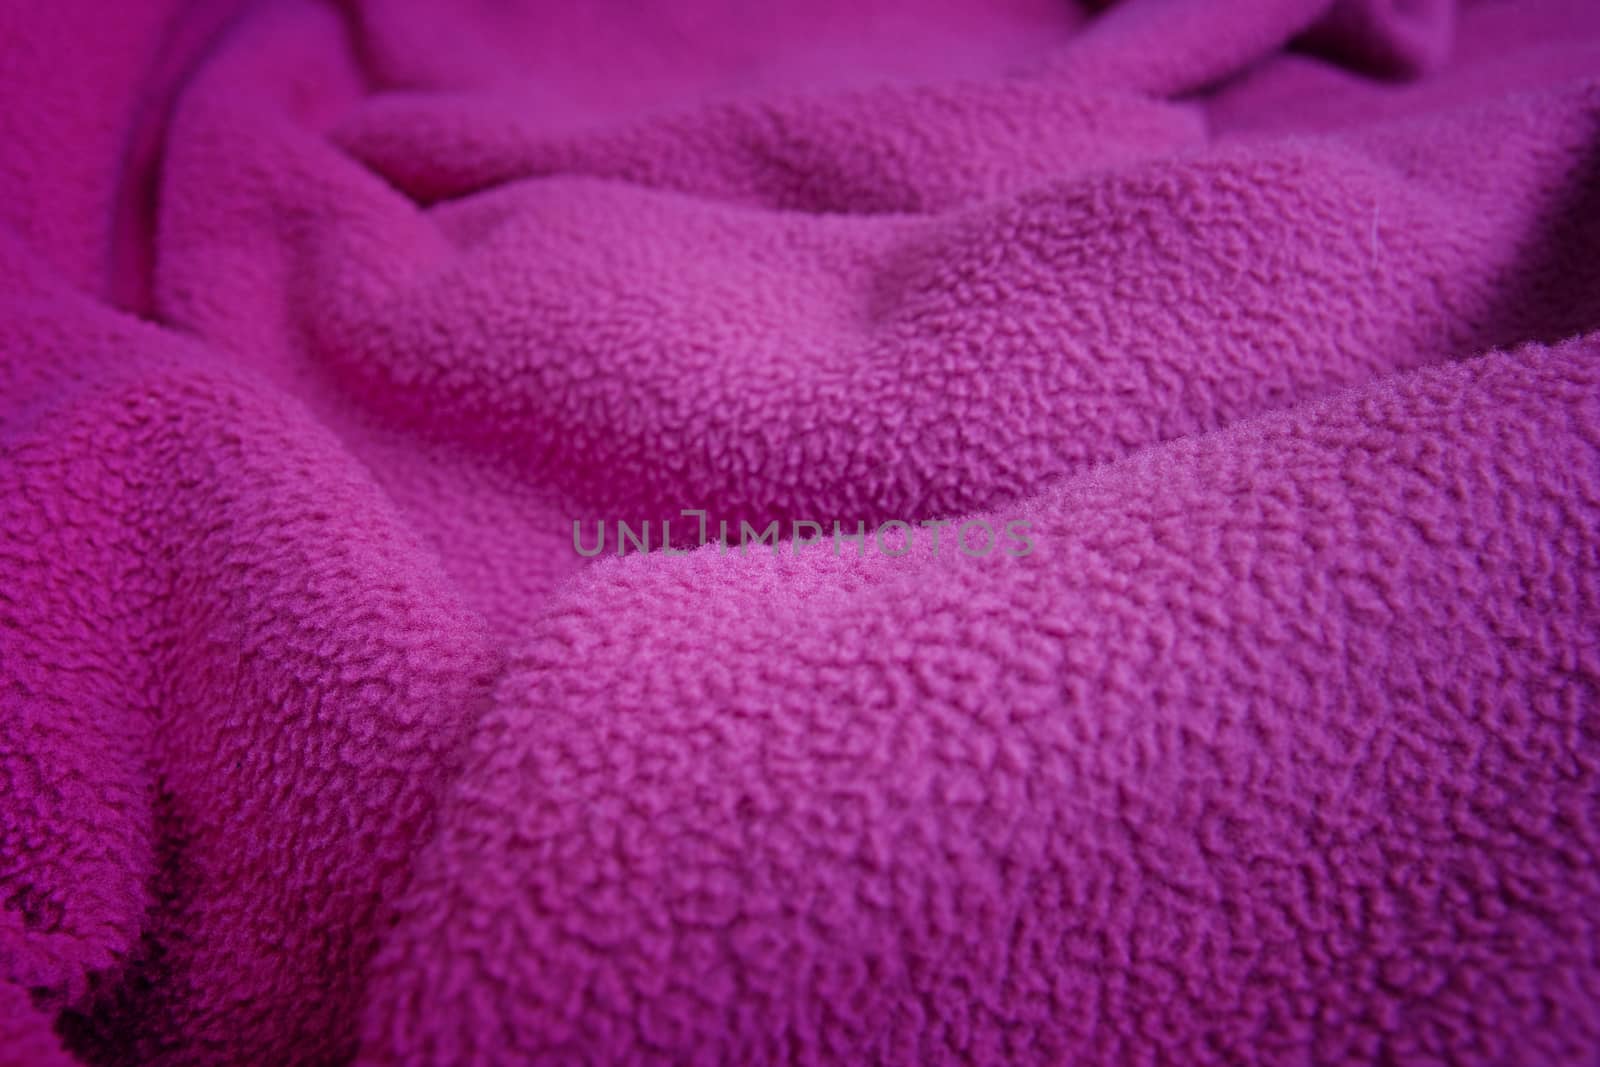 Background of a pink blanket